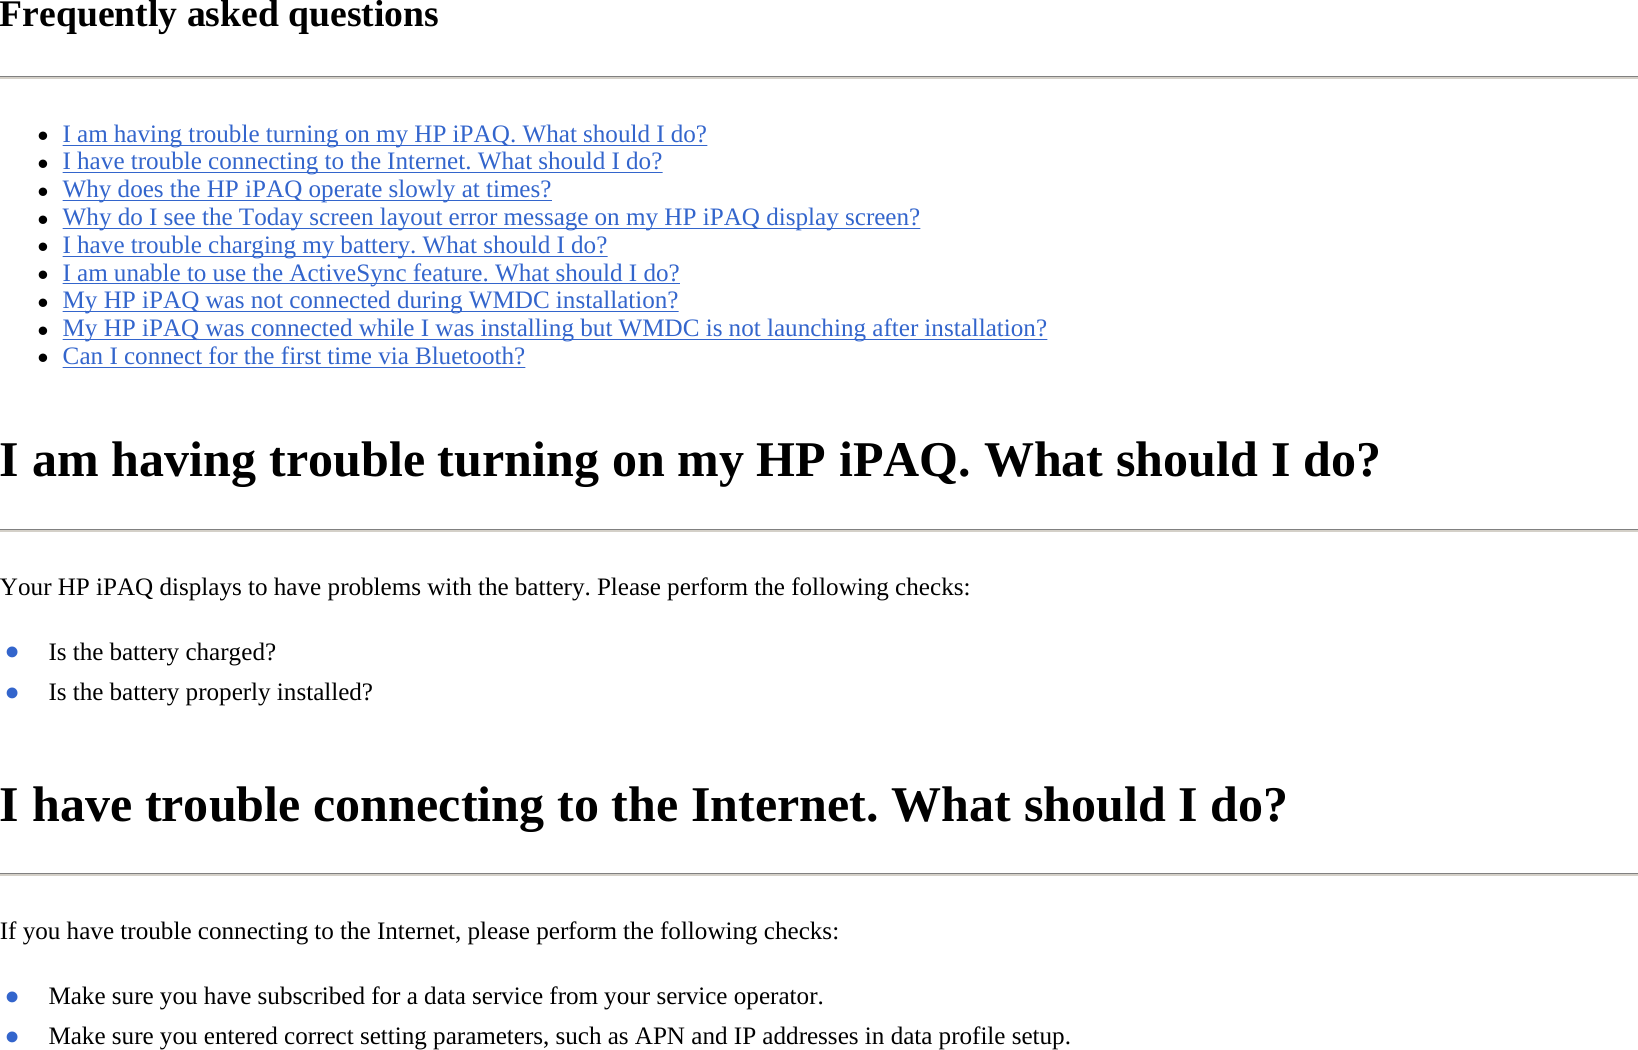 Frequently asked questions  zI am having trouble turning on my HP iPAQ. What should I do?  zI have trouble connecting to the Internet. What should I do?  zWhy does the HP iPAQ operate slowly at times?  zWhy do I see the Today screen layout error message on my HP iPAQ display screen?  zI have trouble charging my battery. What should I do?  zI am unable to use the ActiveSync feature. What should I do?  zMy HP iPAQ was not connected during WMDC installation?  zMy HP iPAQ was connected while I was installing but WMDC is not launching after installation?  zCan I connect for the first time via Bluetooth?  I am having trouble turning on my HP iPAQ. What should I do?  Your HP iPAQ displays to have problems with the battery. Please perform the following checks:  I have trouble connecting to the Internet. What should I do?  If you have trouble connecting to the Internet, please perform the following checks:  ●Is the battery charged?●Is the battery properly installed?●Make sure you have subscribed for a data service from your service operator.●Make sure you entered correct setting parameters, such as APN and IP addresses in data profile setup.